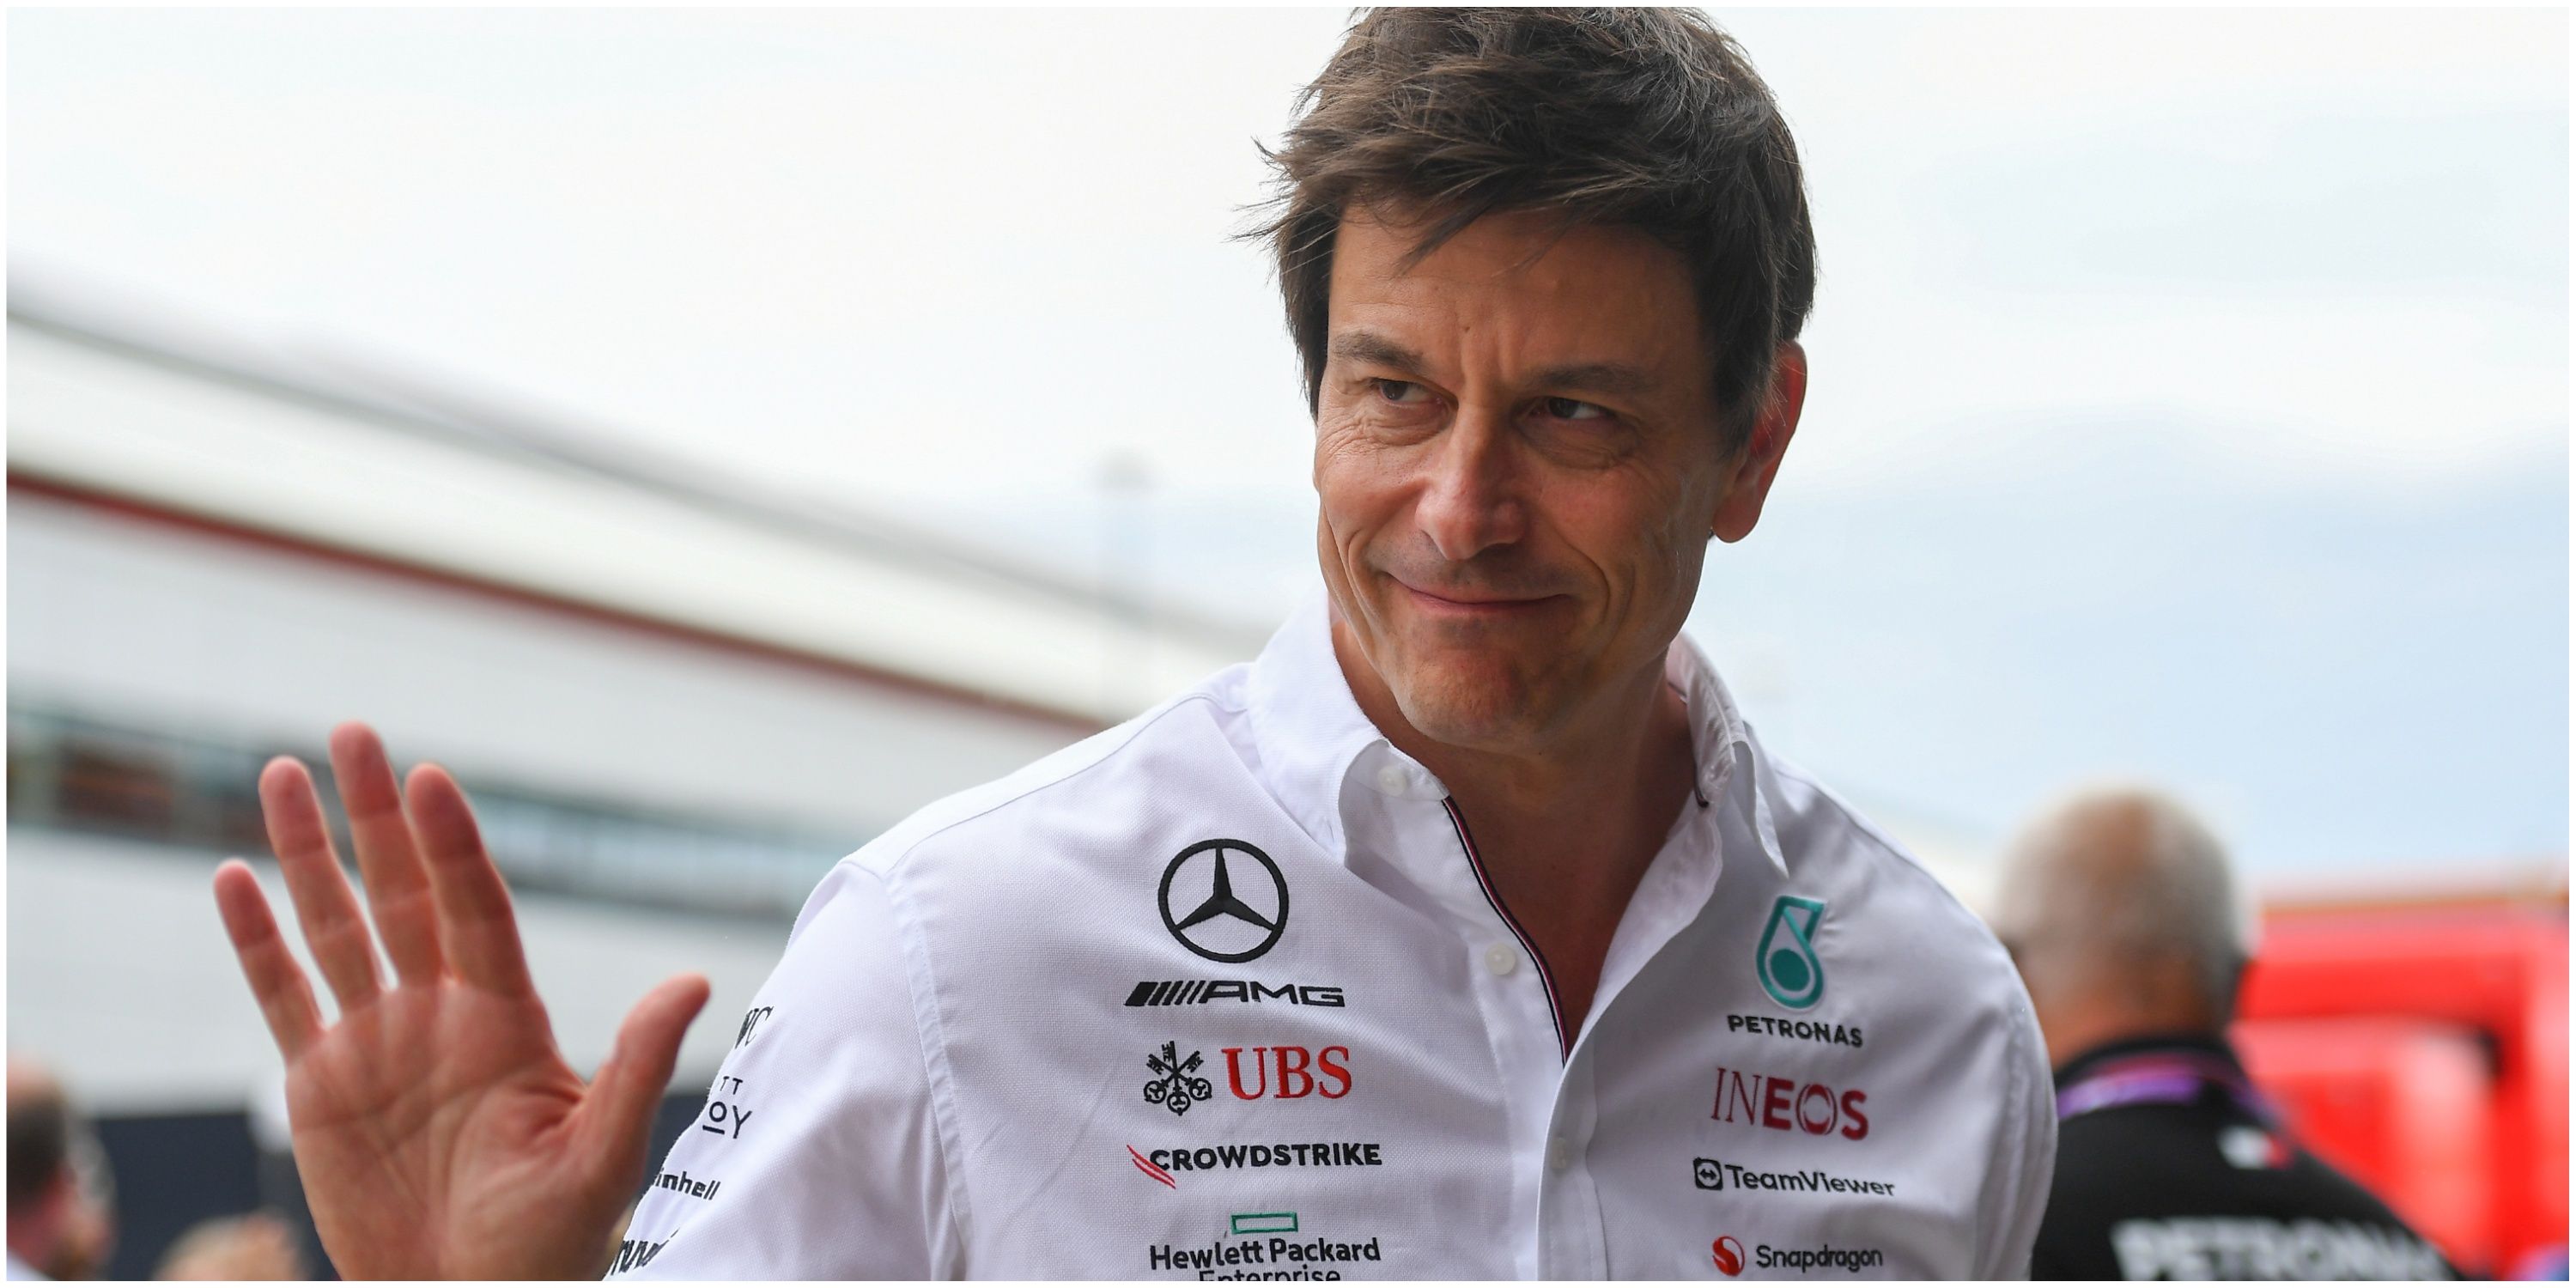 Toto Wolff waves in the British GP paddock